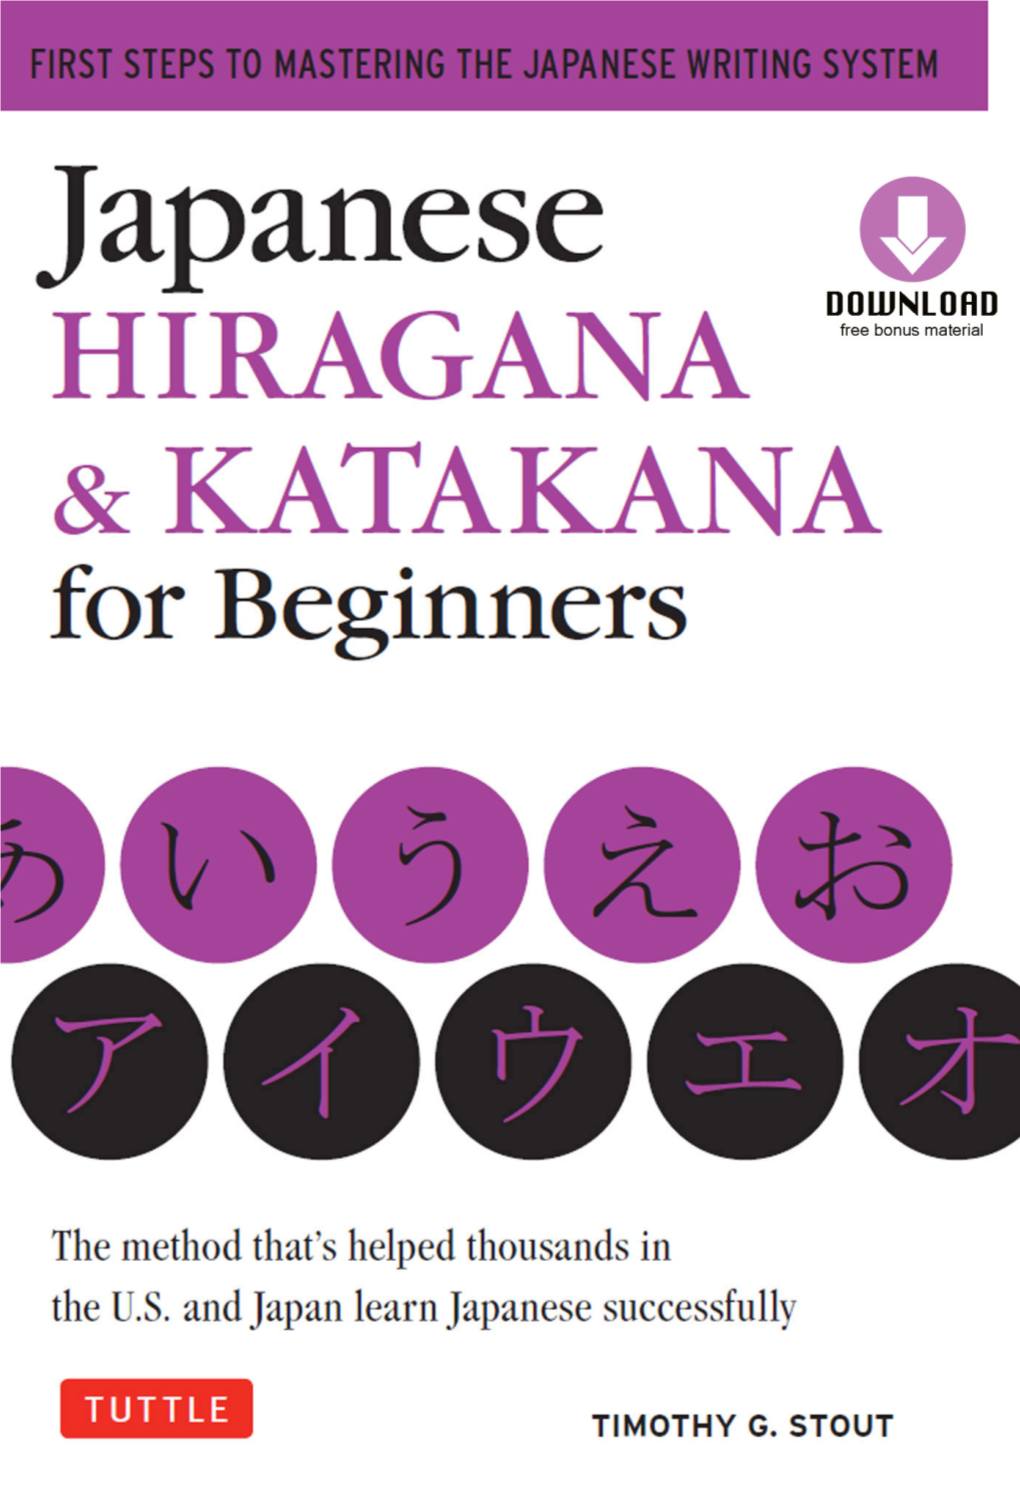 Japanese Hiragana and Katakana for Beginners Is the Right Place to Begin Your Japanese Stud- Ies